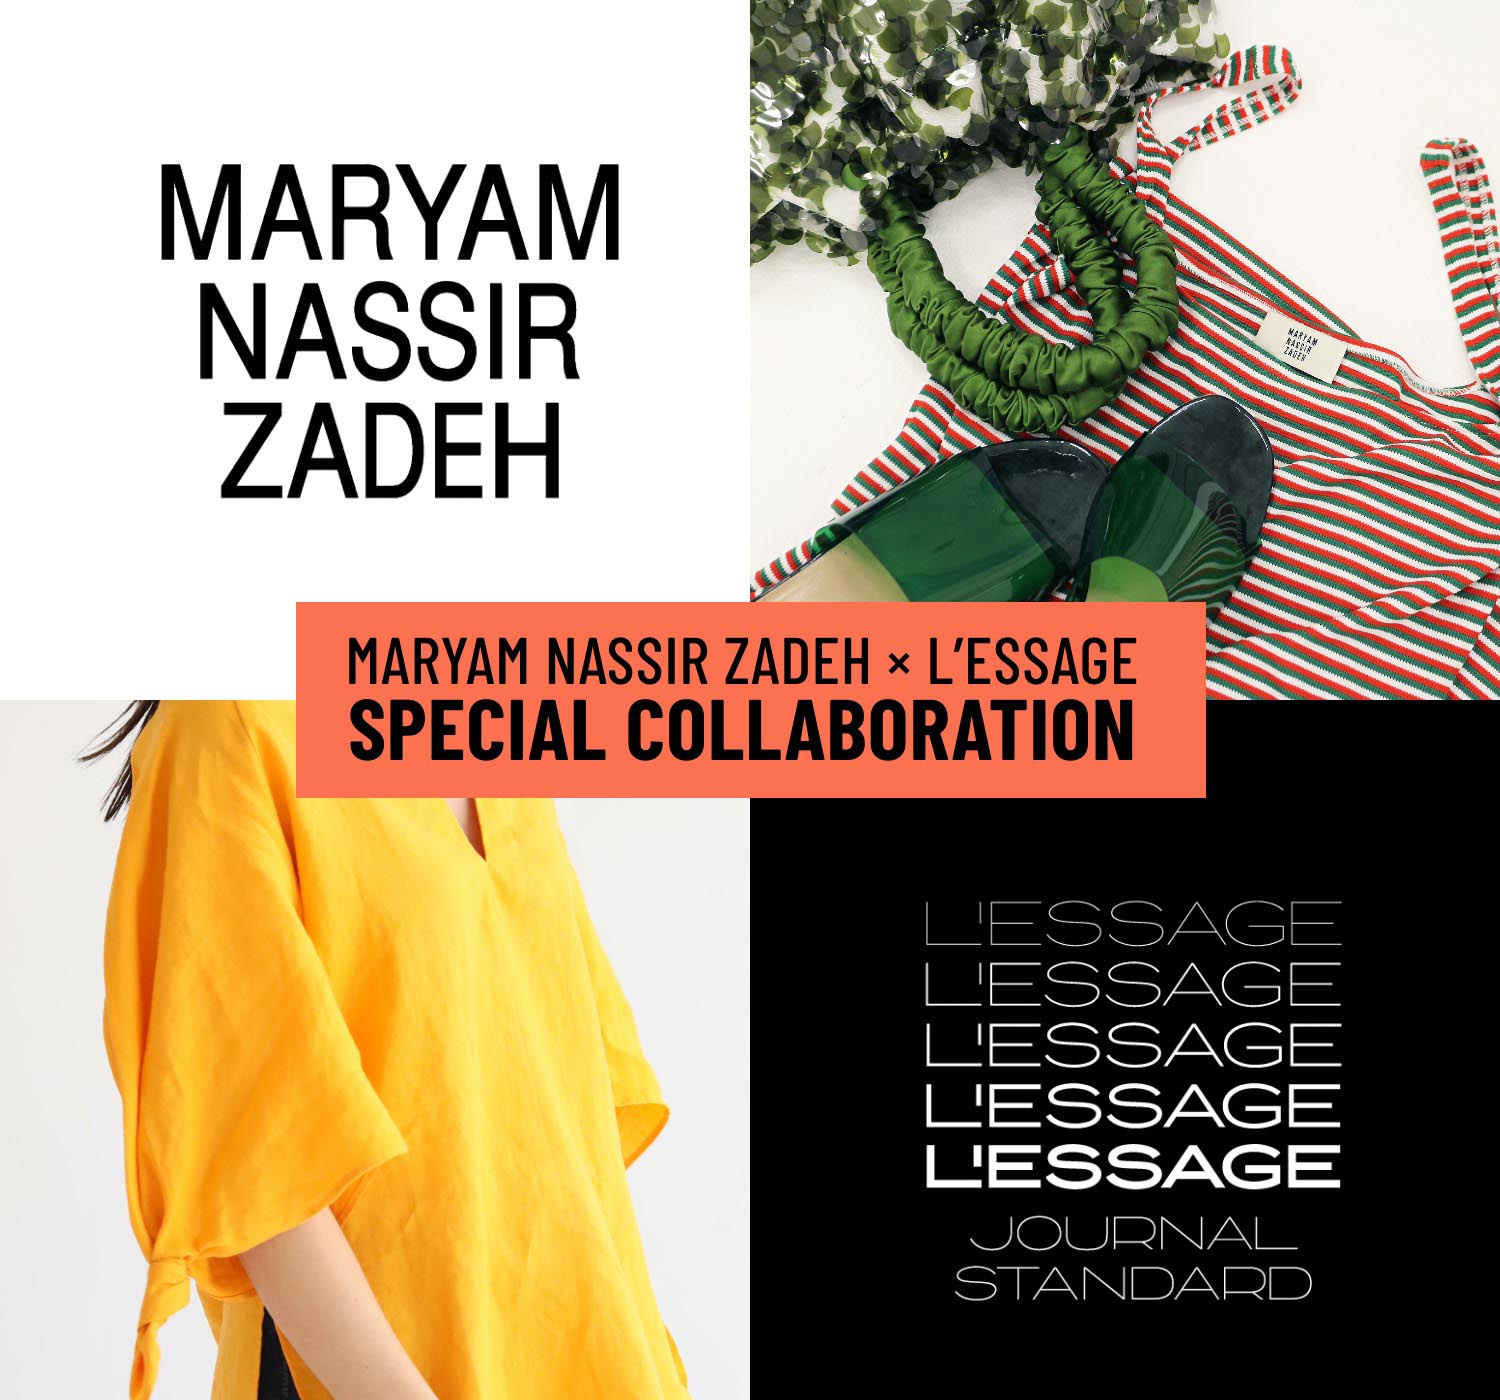 MARYAM NASSIR ZADEH × L'ESSAGE SPECIAL COLLABORATION｜JOURNAL